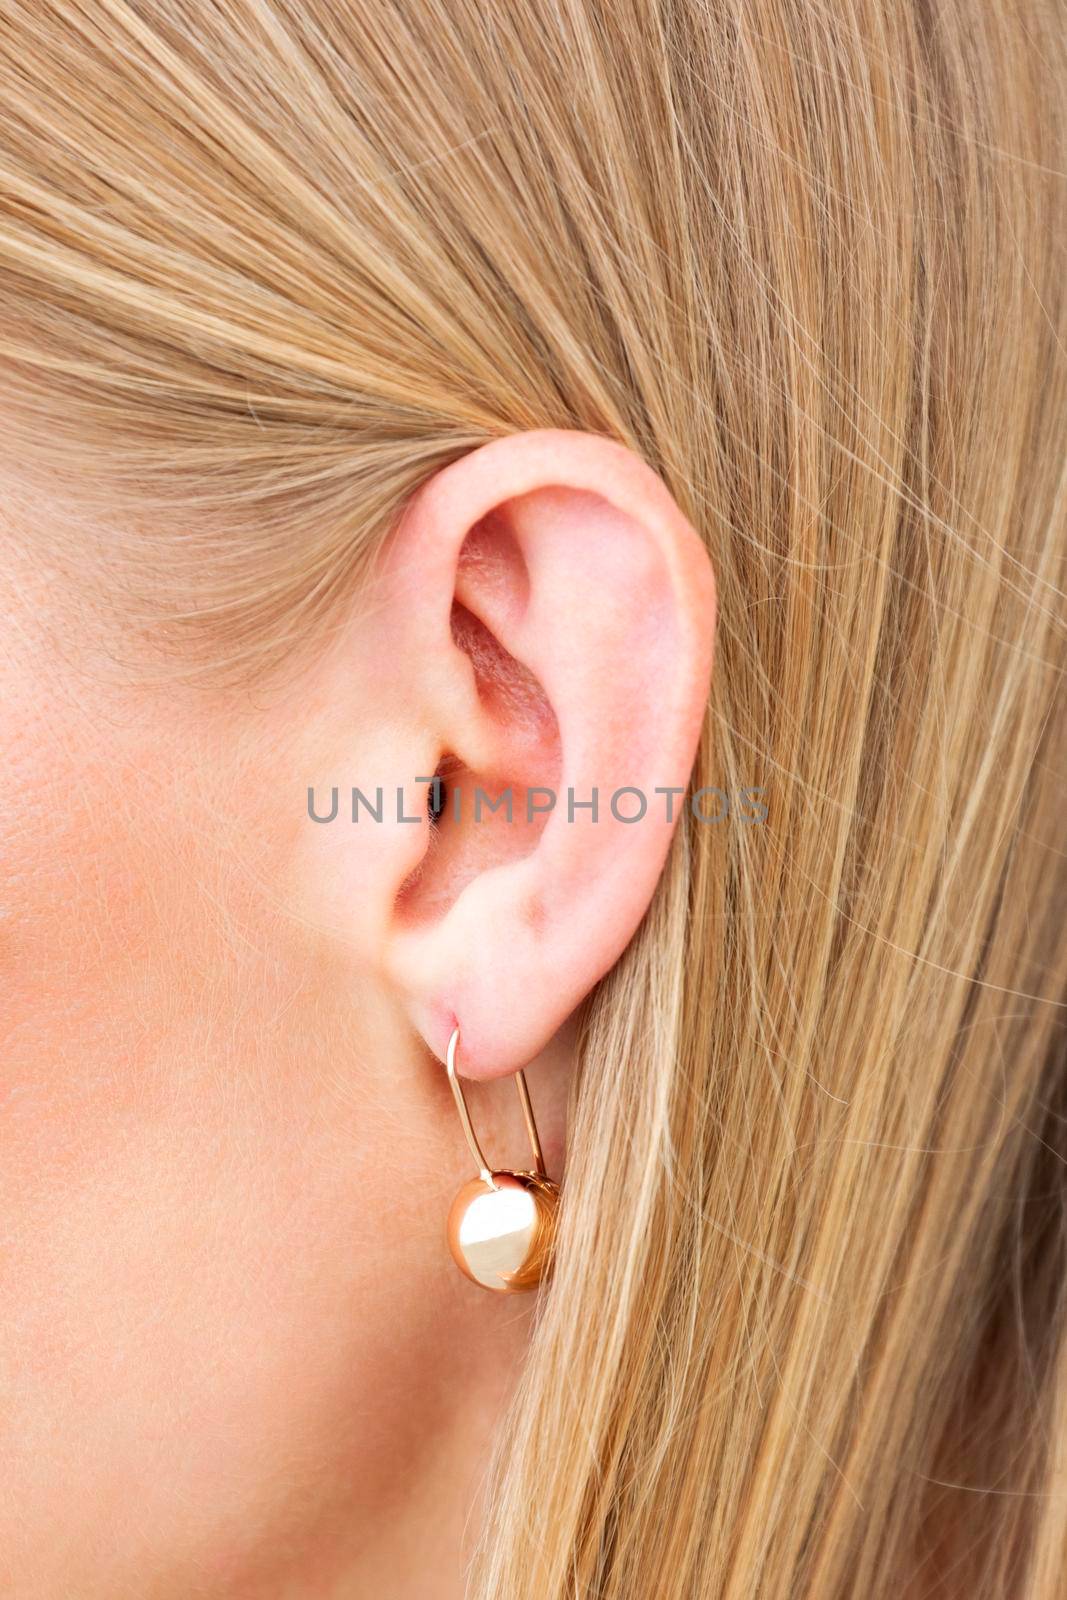 Closeup shot of female ear with earring by Nobilior